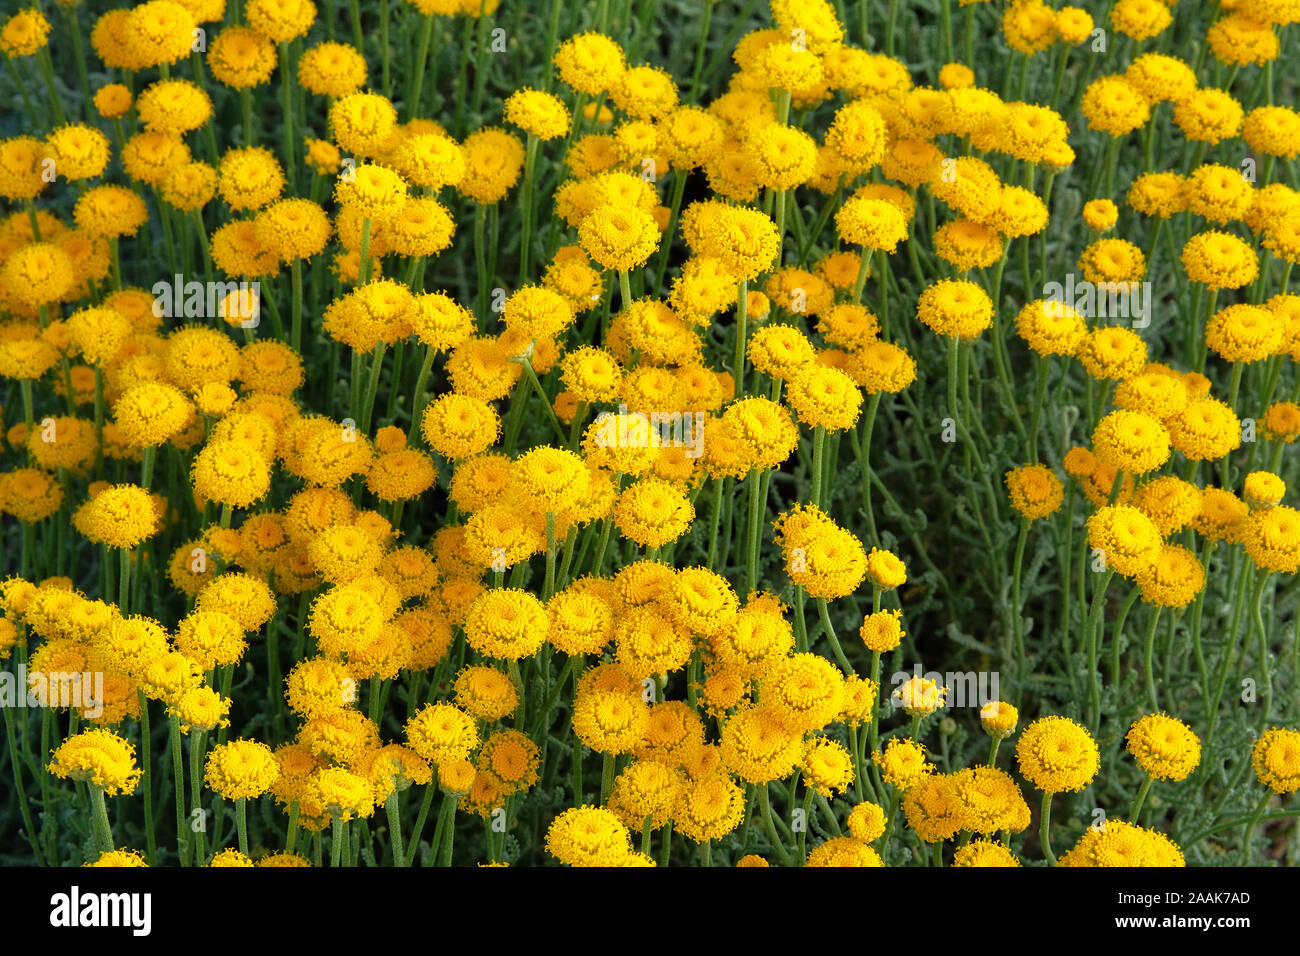 Helichrysum flowers on green nature background. Yellow flowers for herbal pharmacy. Medicinal herb. Stock Photo